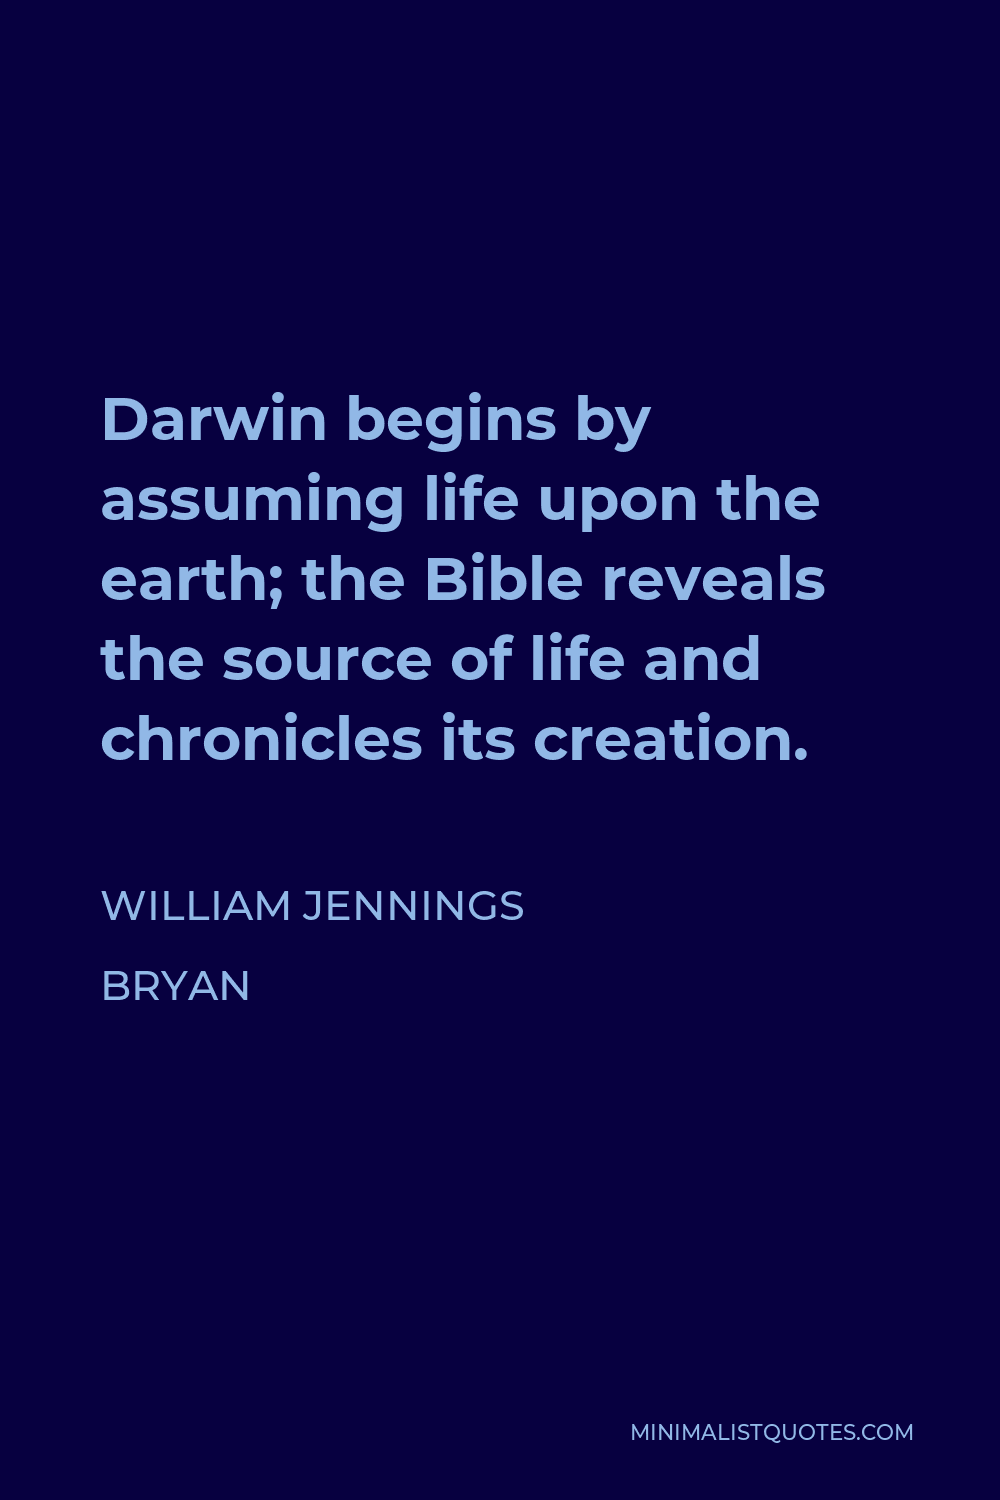 William Jennings Bryan Quote - Darwin begins by assuming life upon the earth; the Bible reveals the source of life and chronicles its creation.